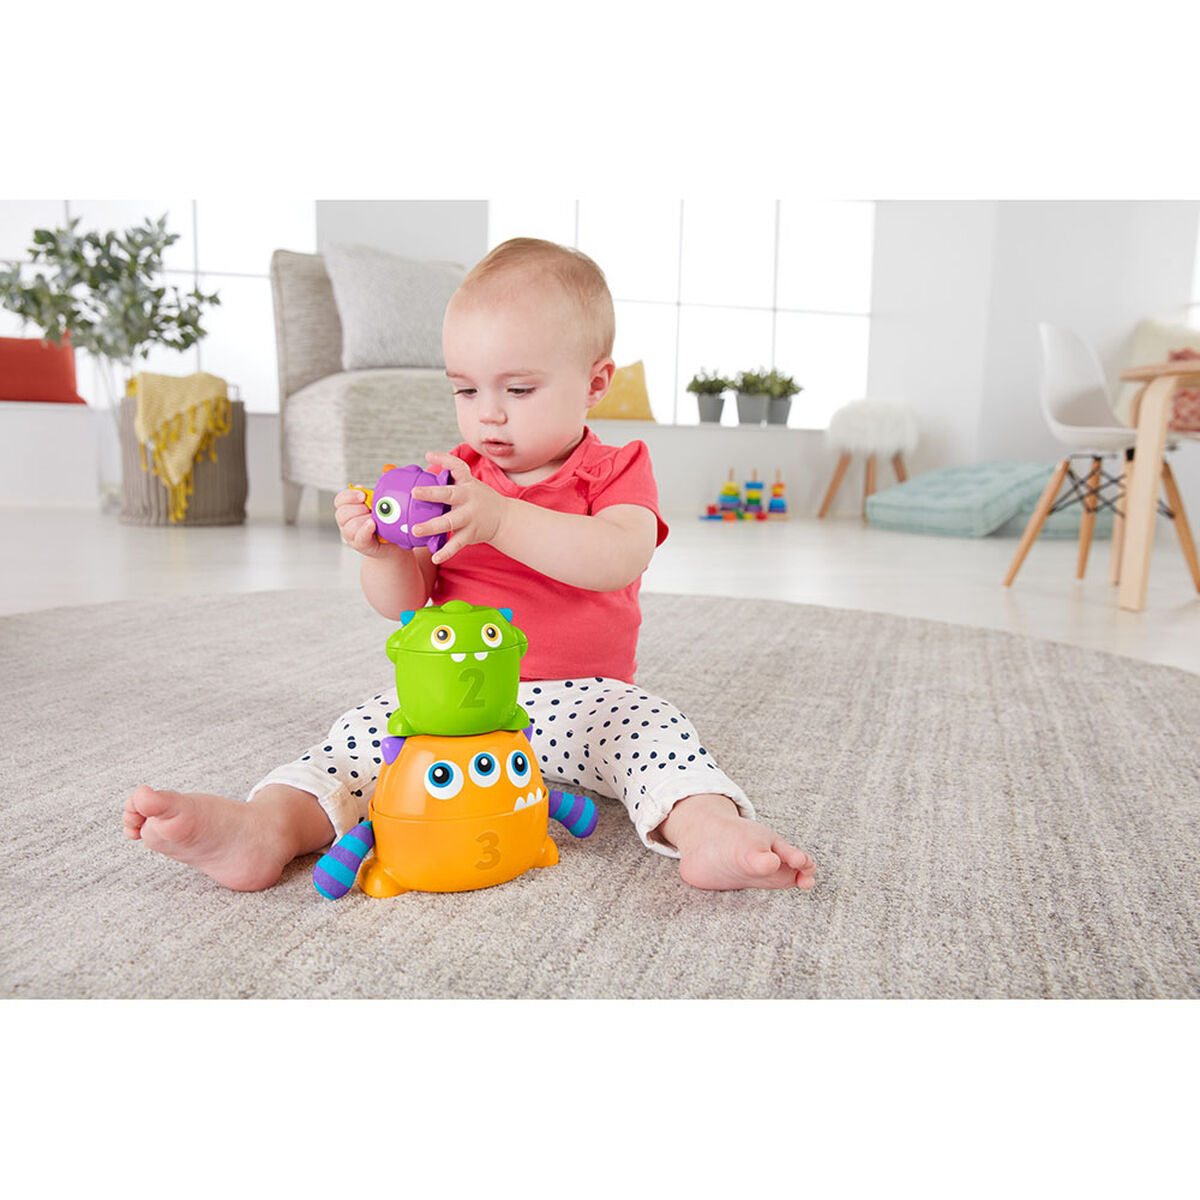 Fisher Price Monstruos Apilables